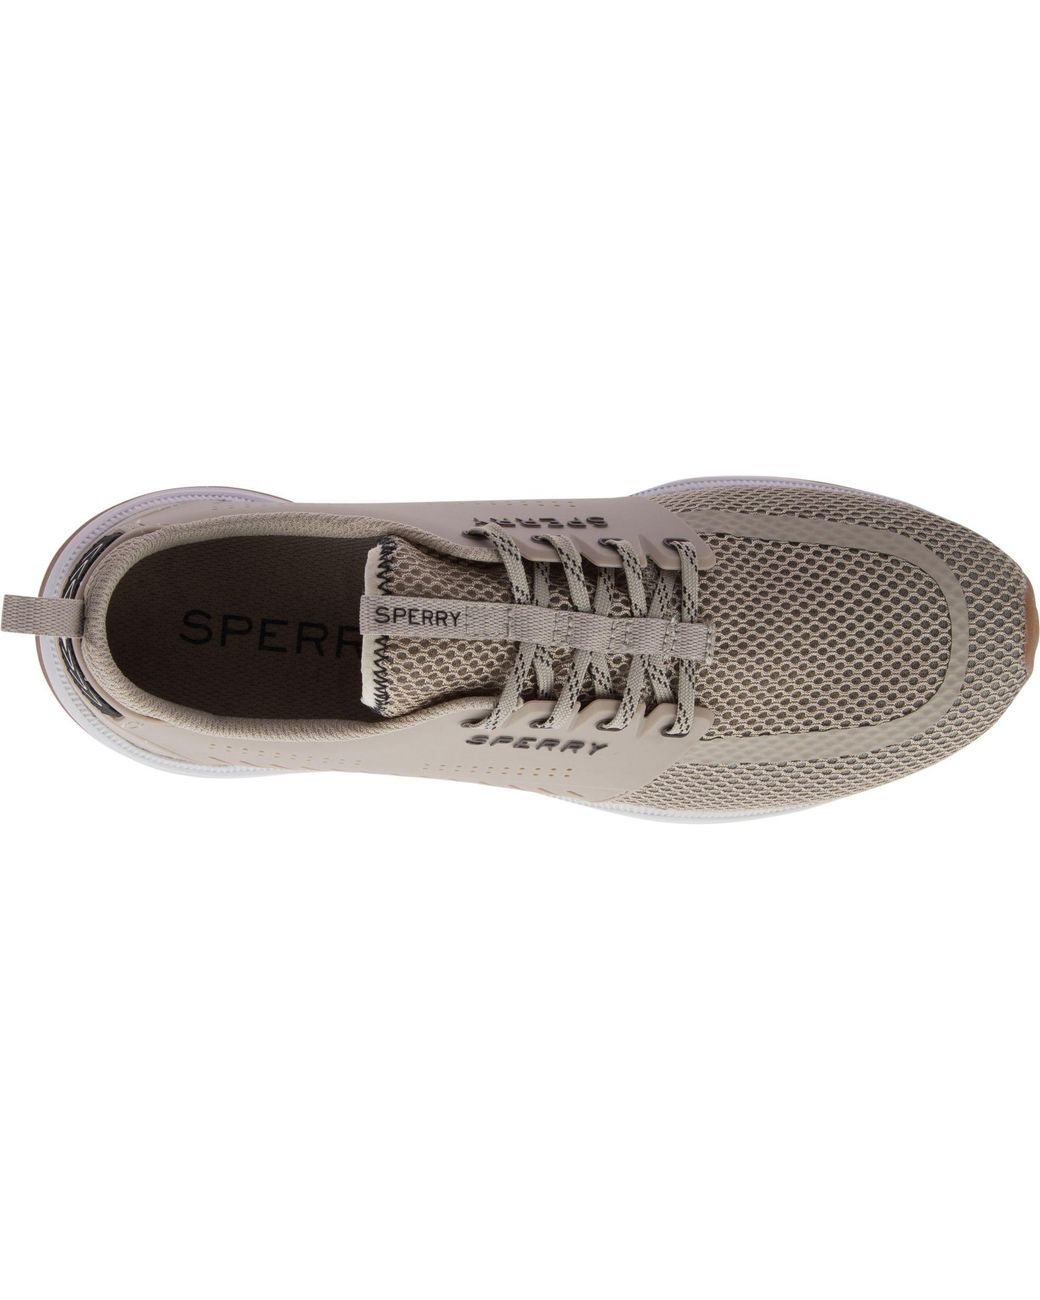 sperry h2o shoes